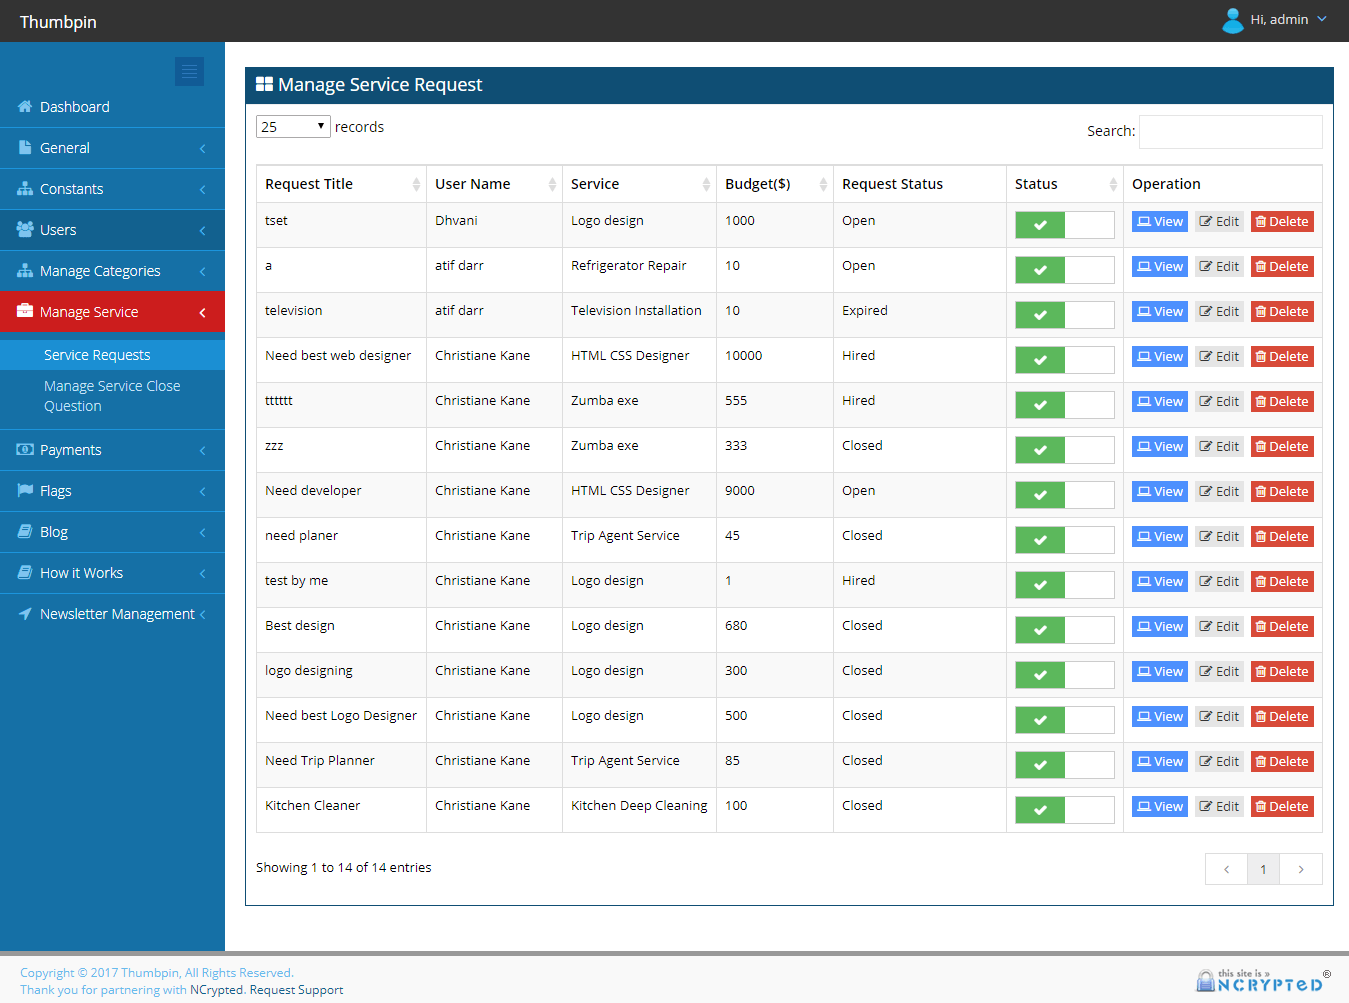 Service Notifications Based on Service Criteria